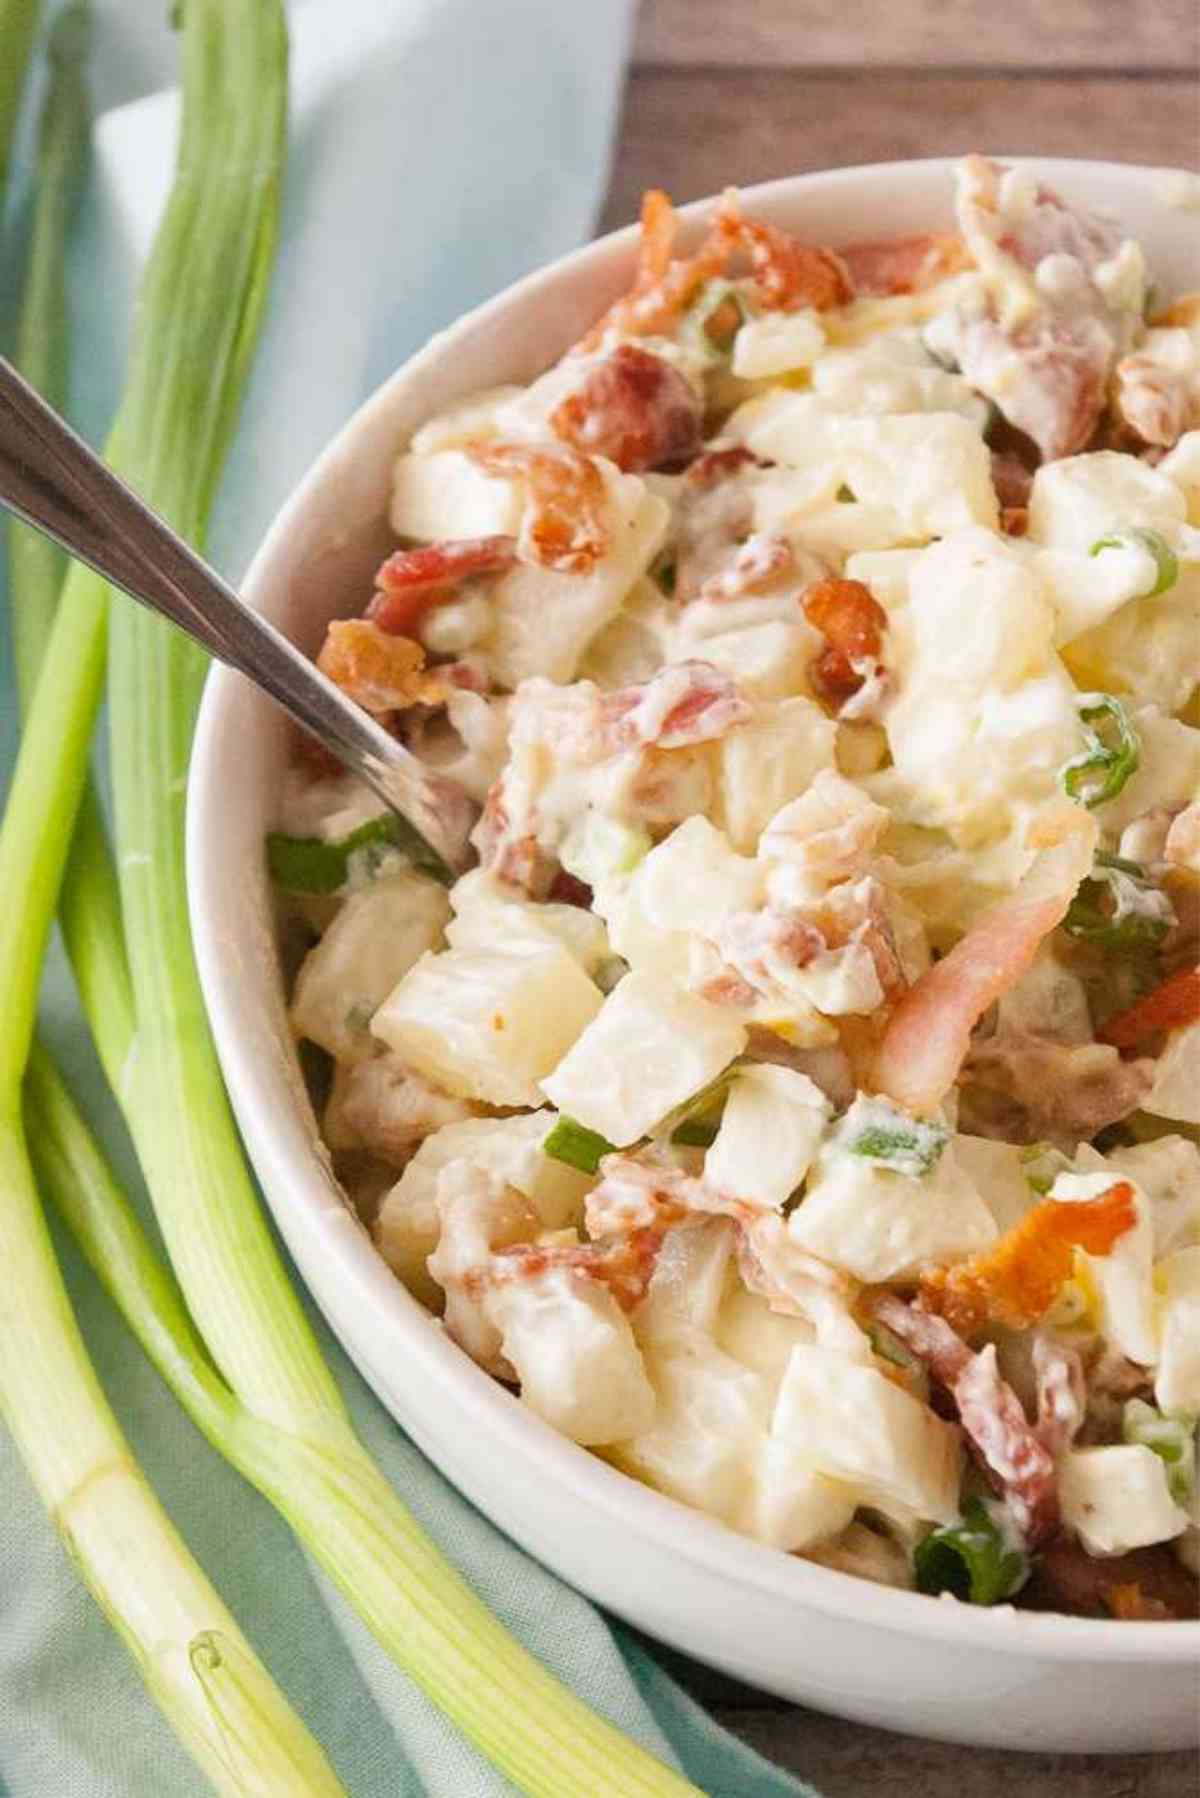 A bowlful of dill pickle potato salad garnished with green onions.